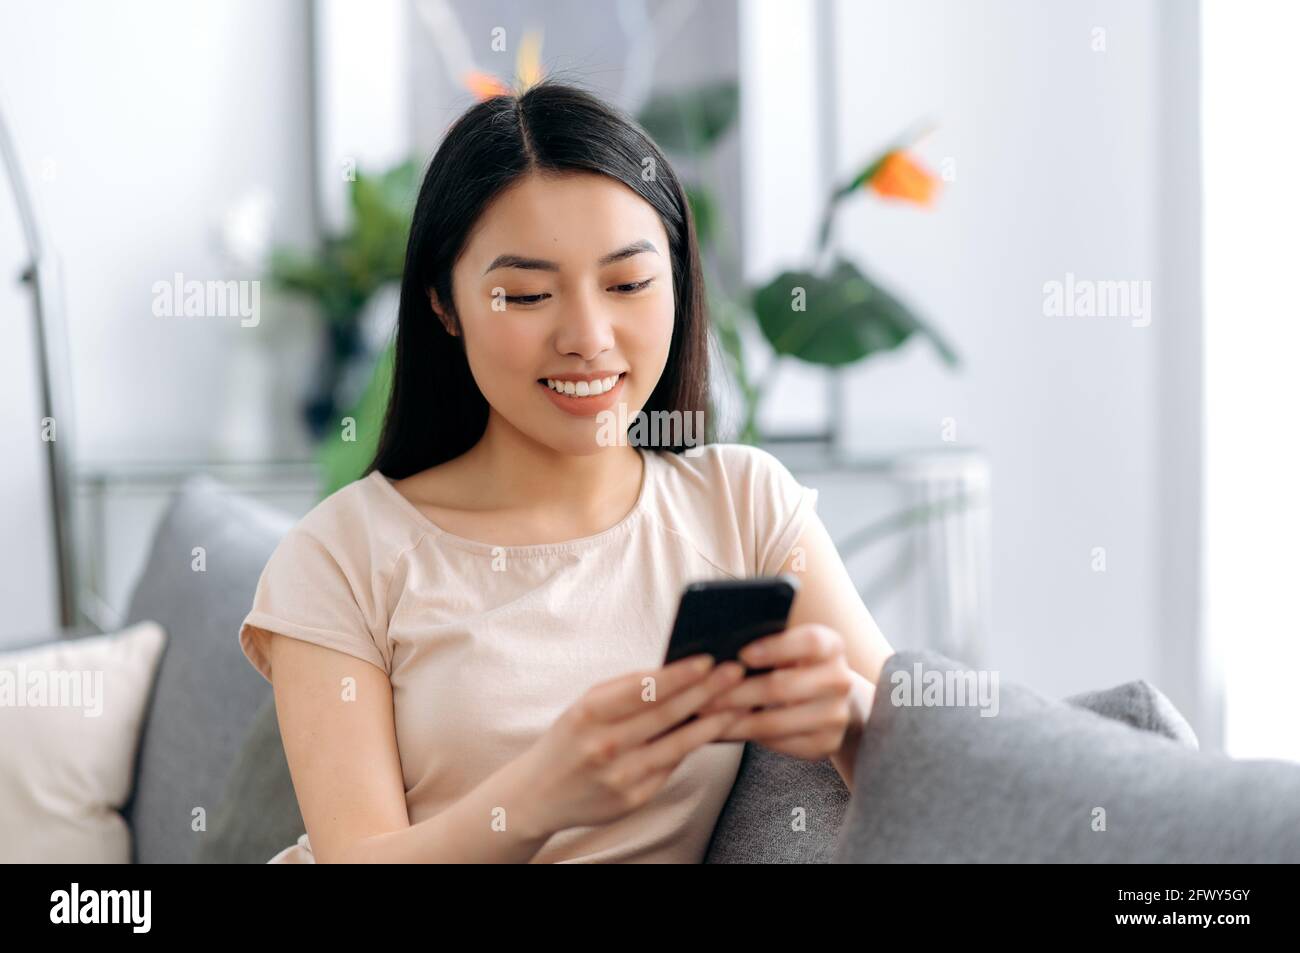 Joyful japanese attractive girl using her smartphone while sitting on sofa in stylish clothes, browsing internet and social networks, texting with friends or family, found out good news, smiles Stock Photo